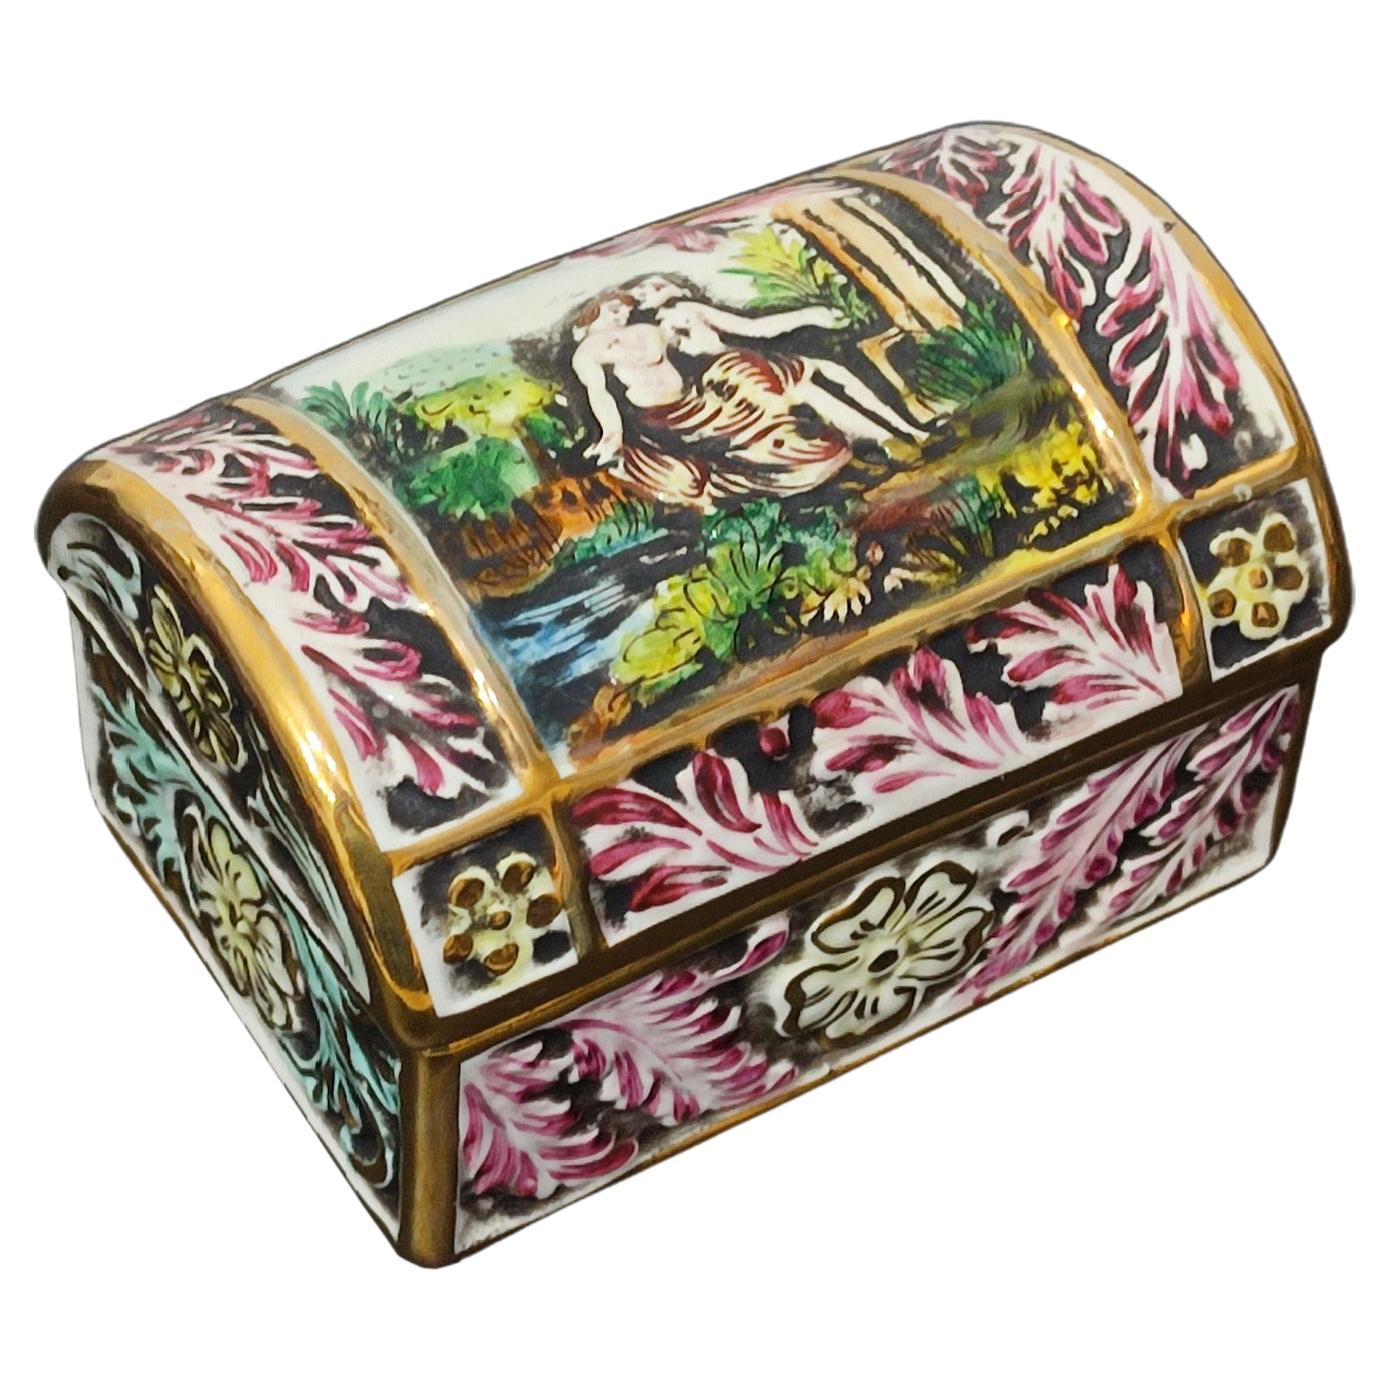 Capodimonte Porcelain Chest, Jewelry Box, Italy Mid 20th Century - FREE SHIPPING